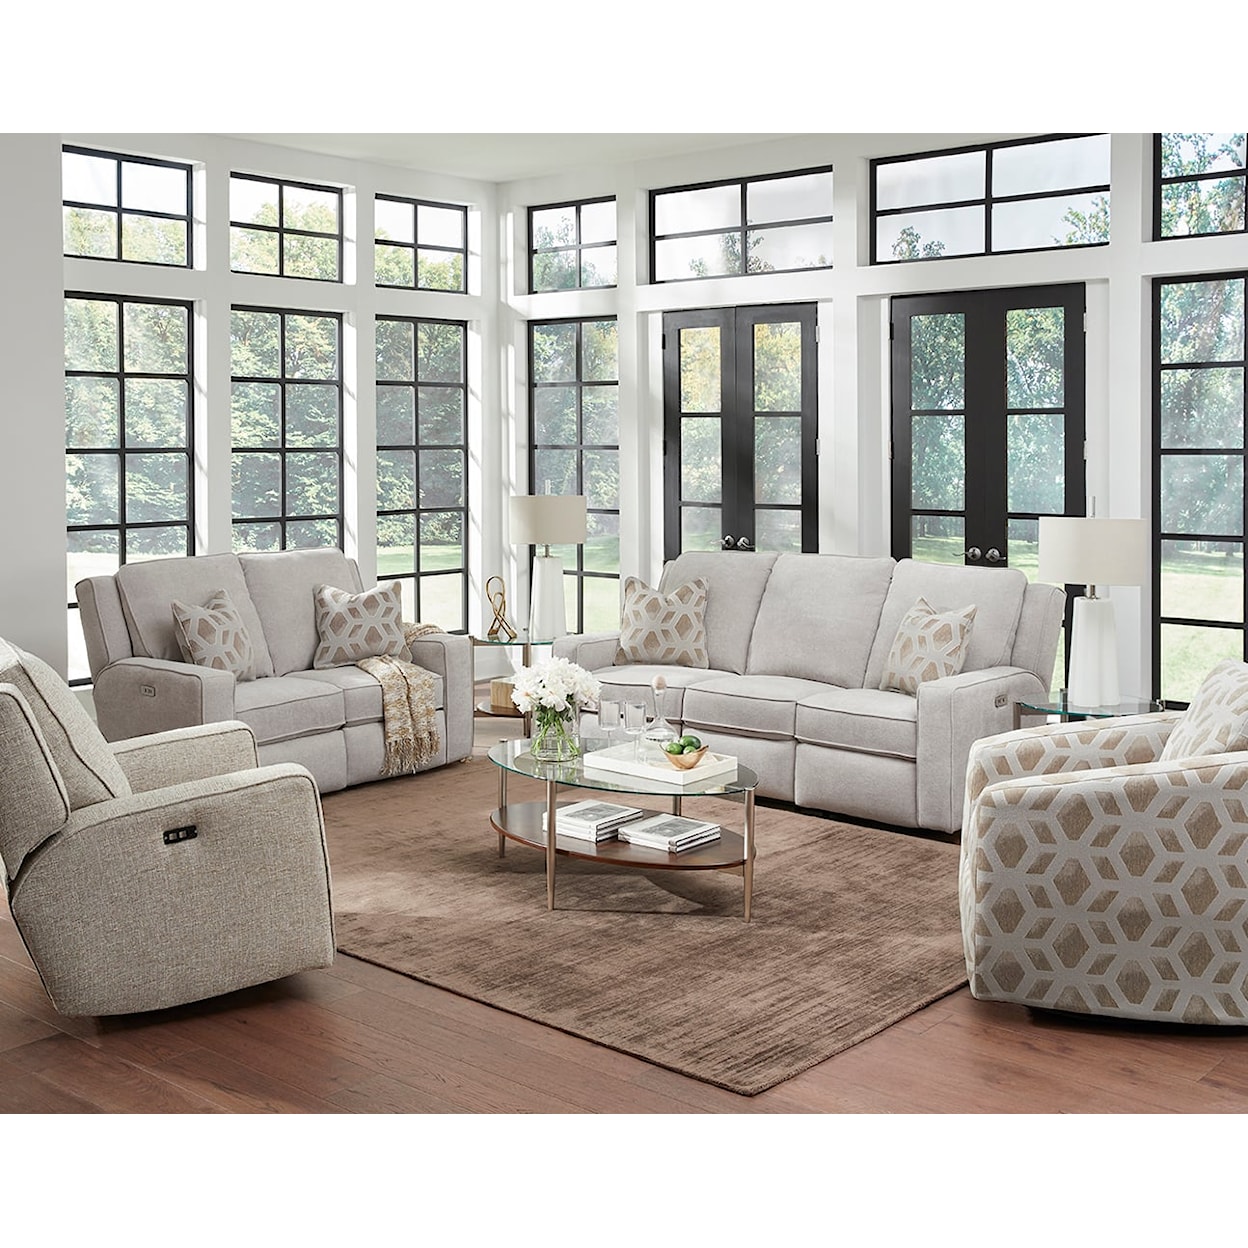 Southern Motion City Limits Pwr Hdrst Dbl Recl Sofa